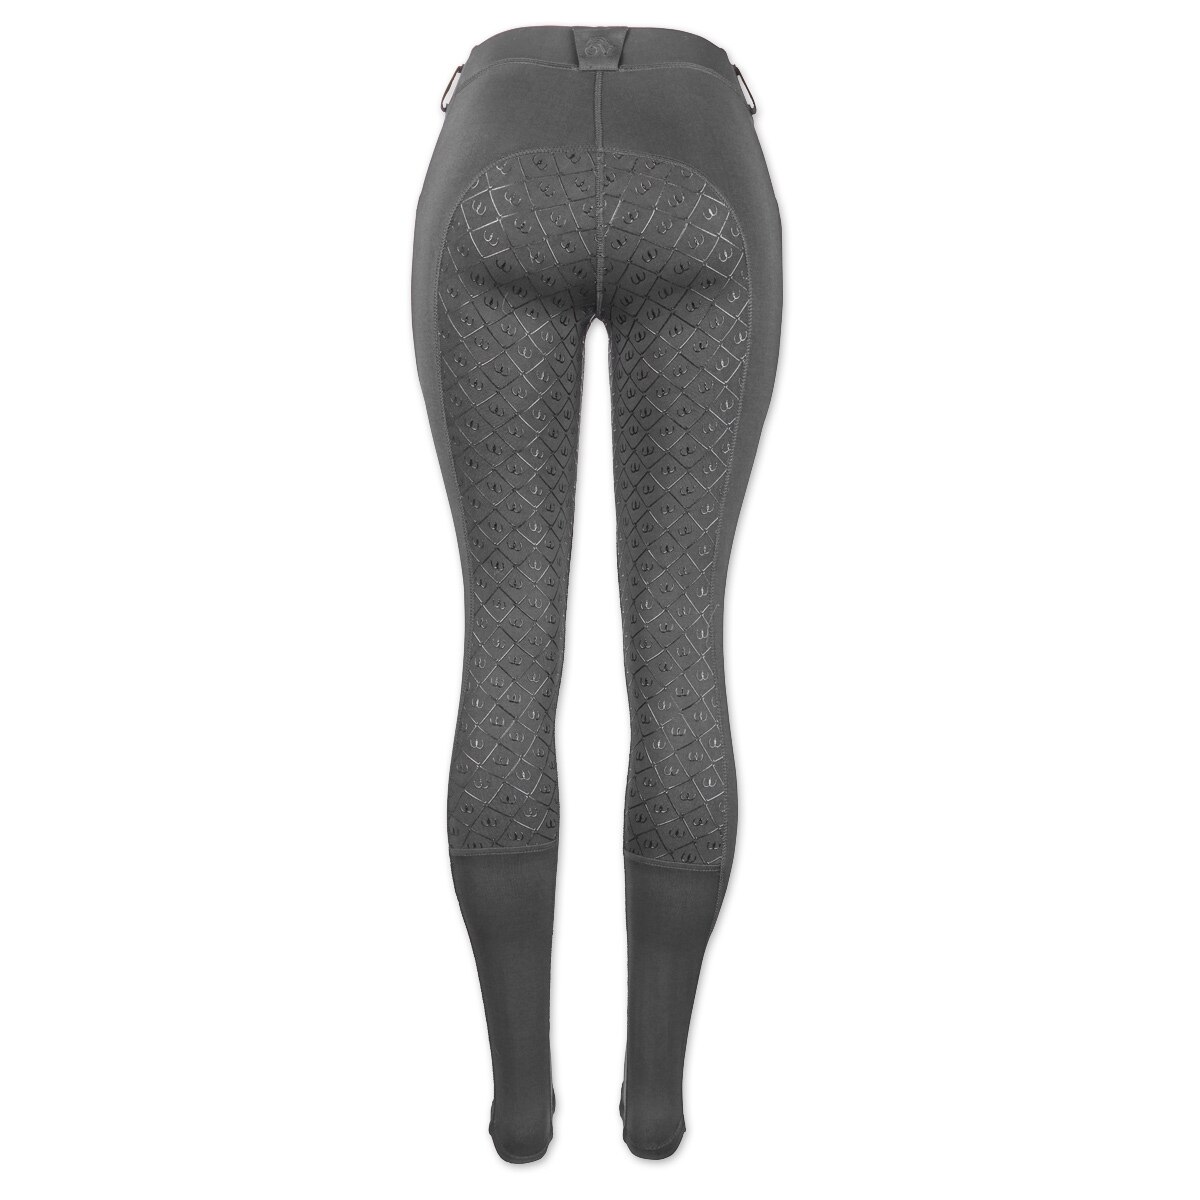 Dublin Performance Compression Riding Tights with Silicone Print Grip Design 